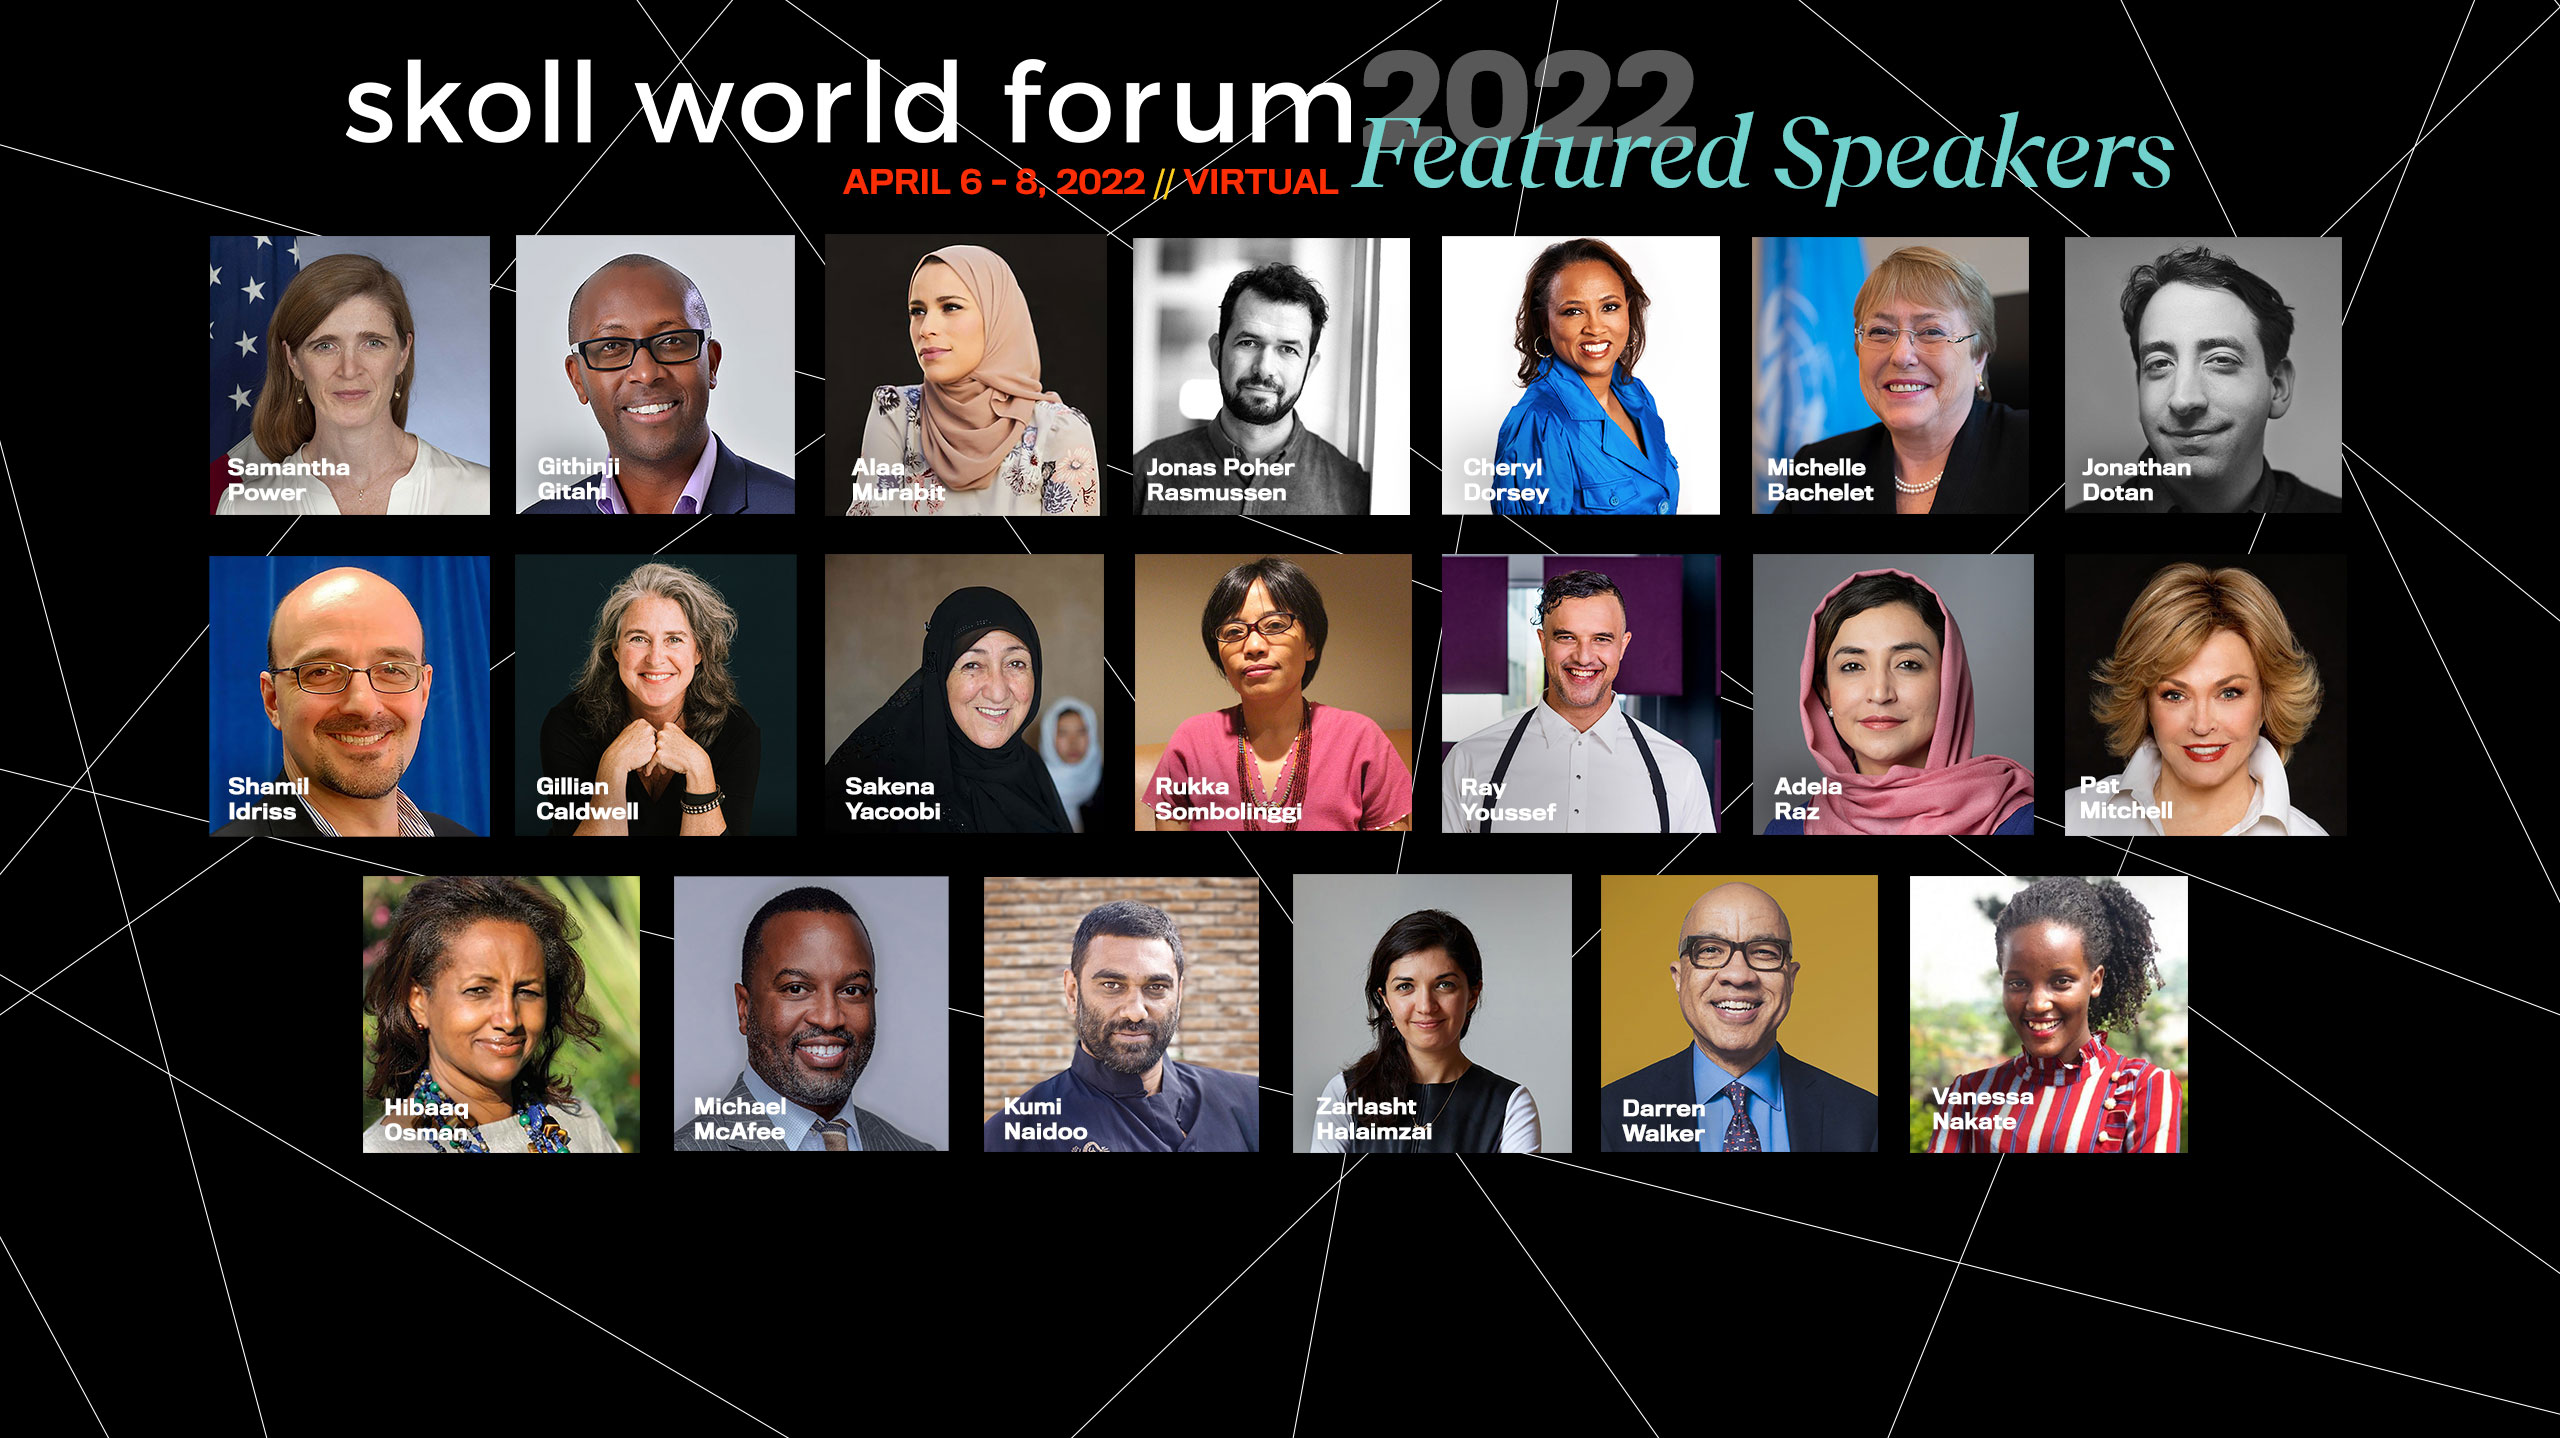 Skoll Announcing Skoll World Forum Featured Speakers and Sessions